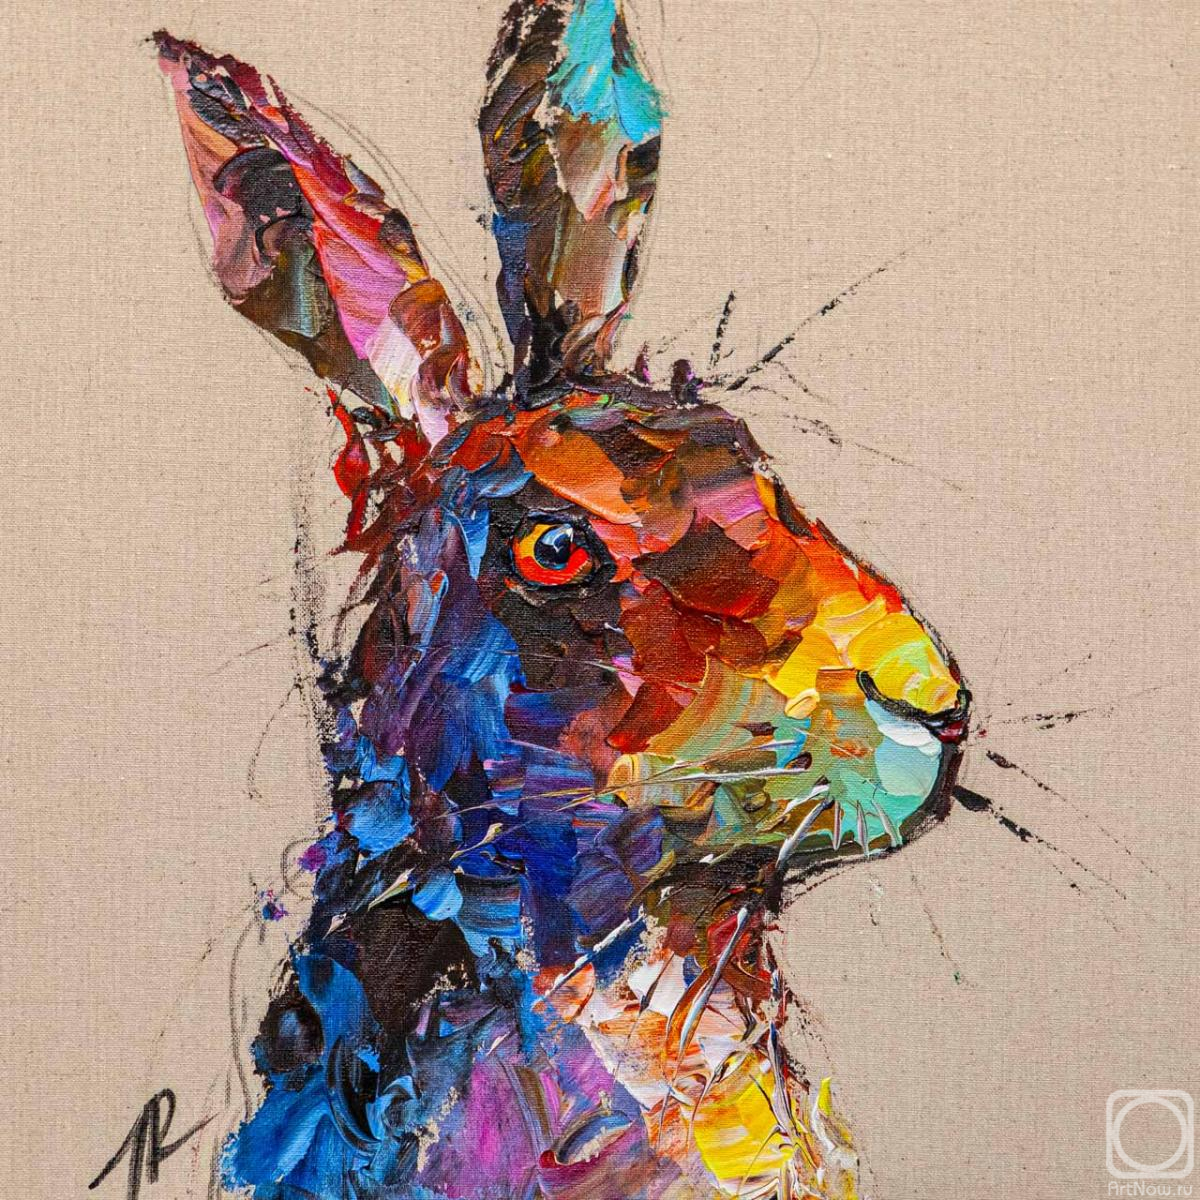 Rodries Jose. Portrait of a hare